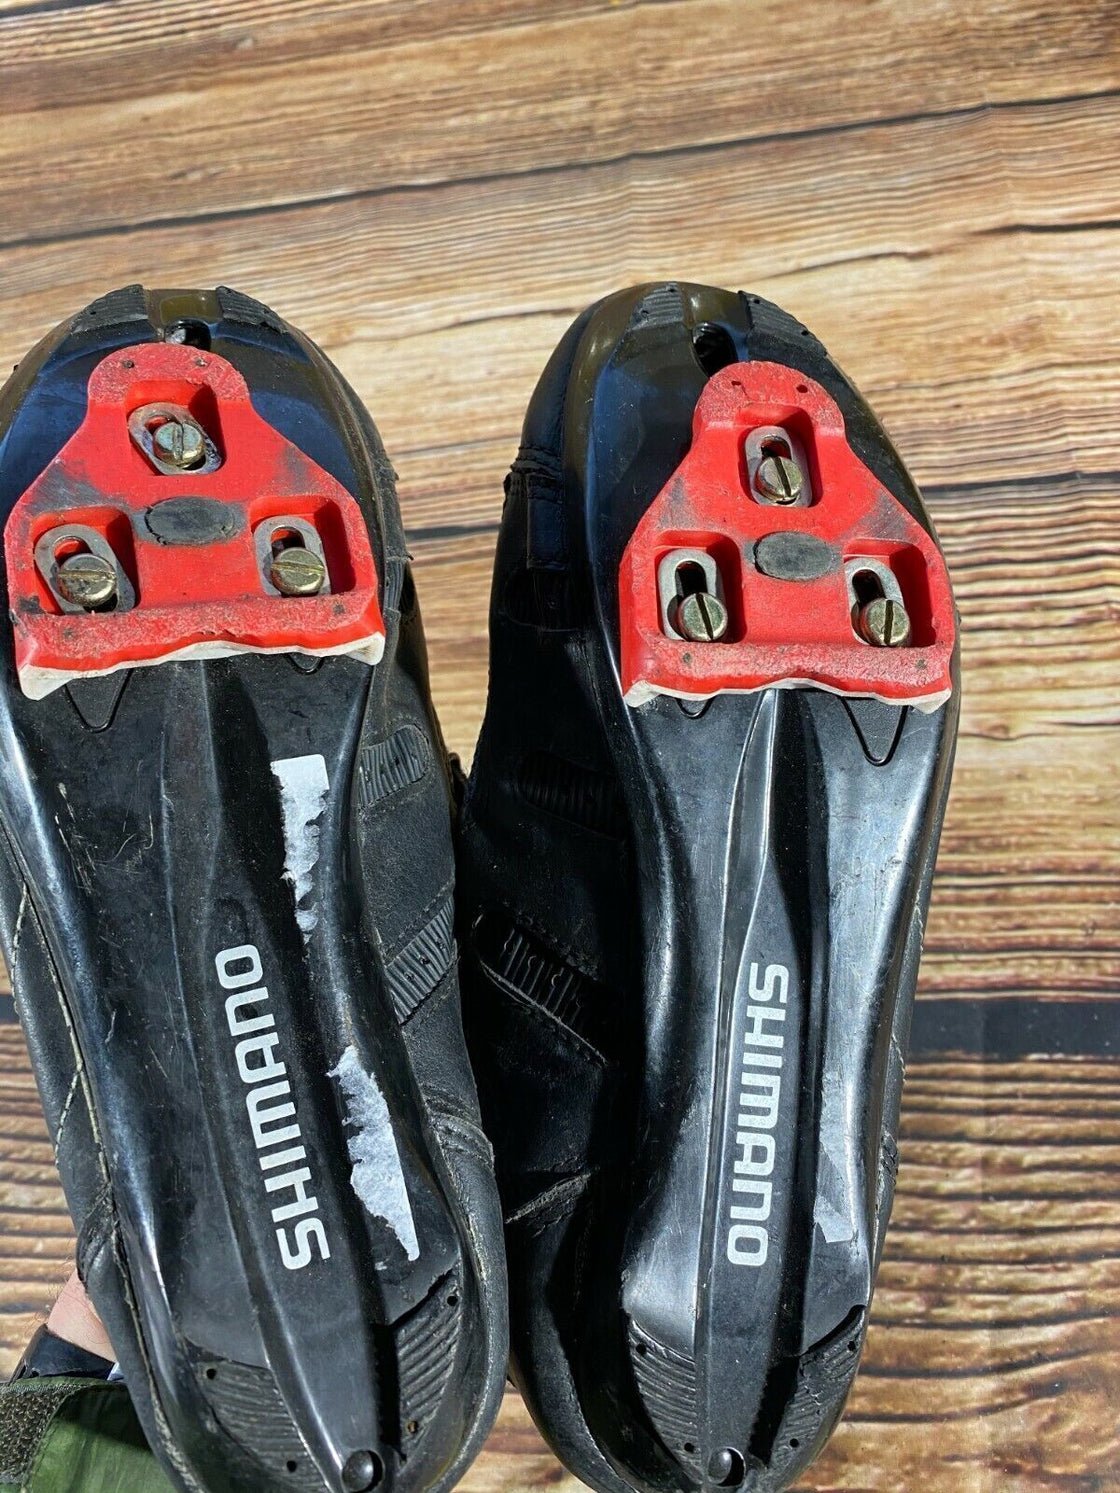 SHIMANO R078 Road Cycling Shoes Clipless Biking Boots Size EU 41 with Cleats